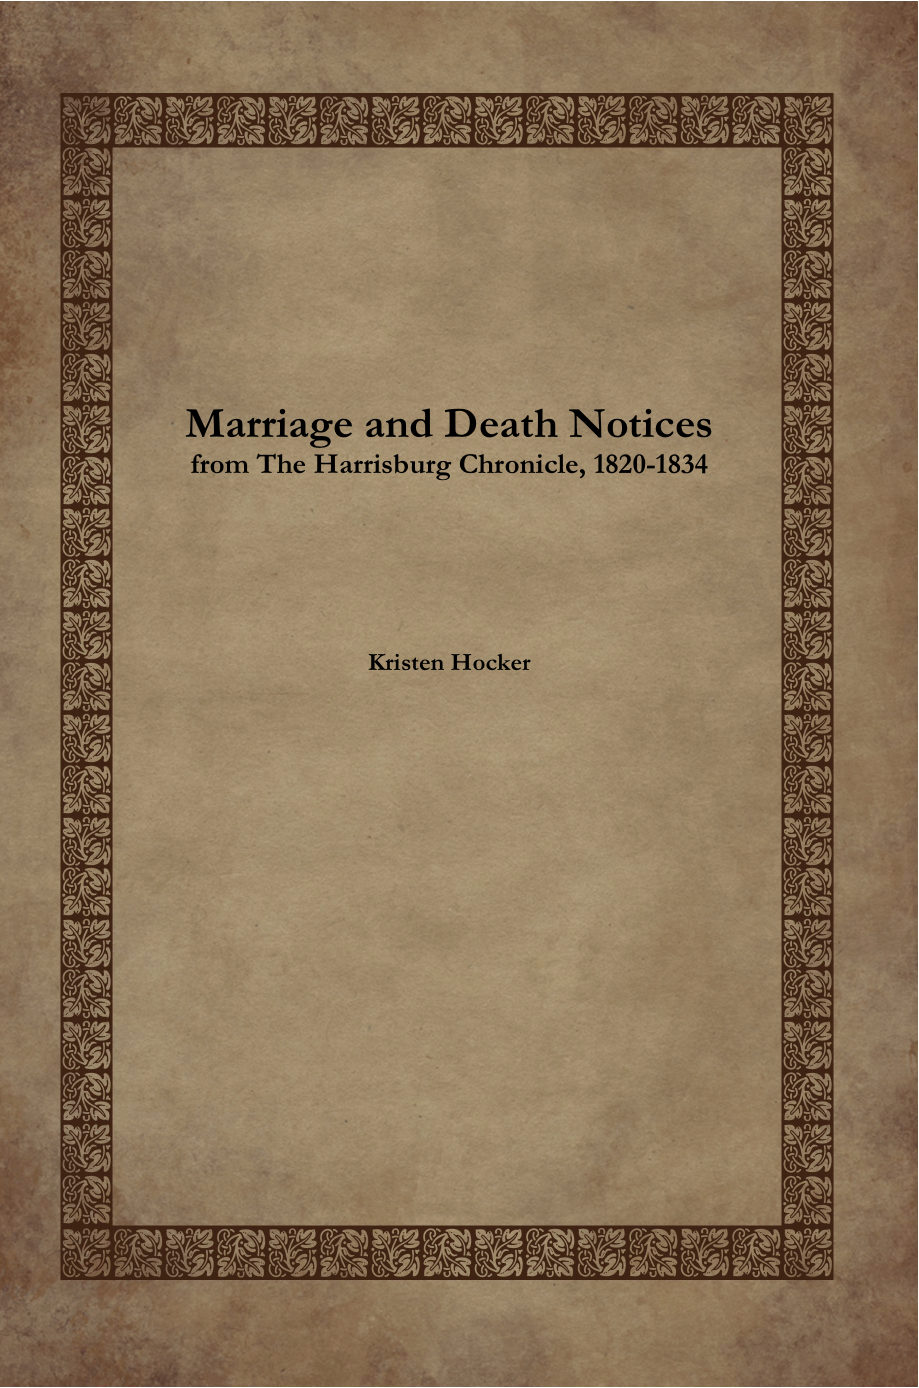 Marriage and Death Notices in the Harrisburg Chronicle, 1820-1834